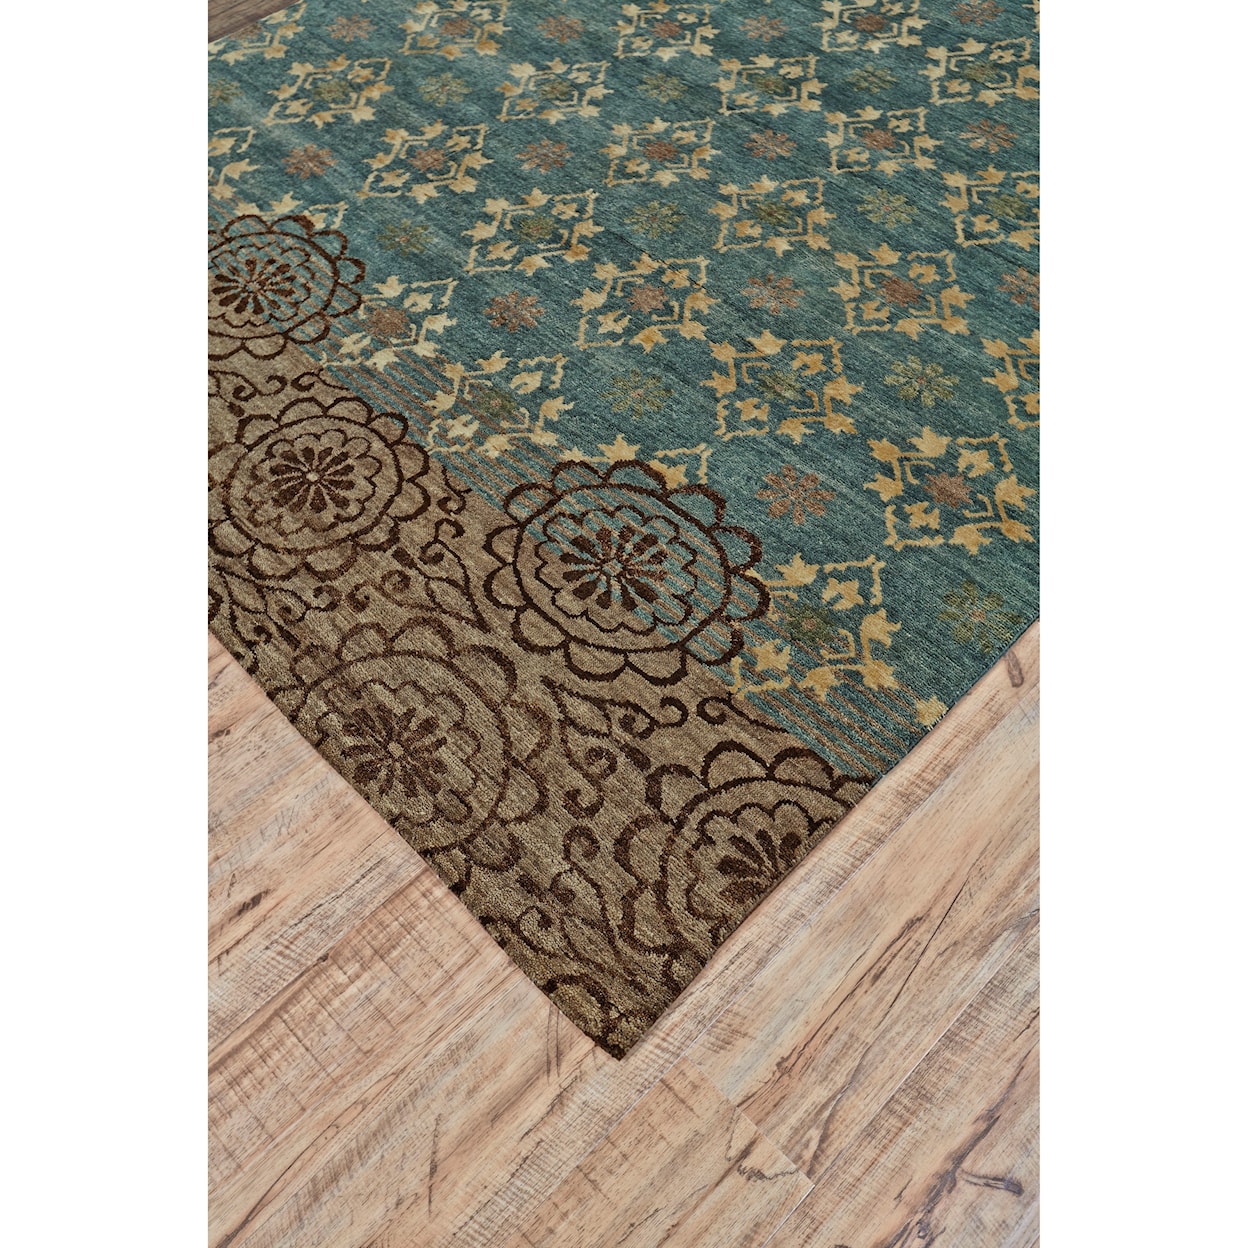 Feizy Rugs Qing Silver Sage 9'-6" x 13'-6" Area Rug